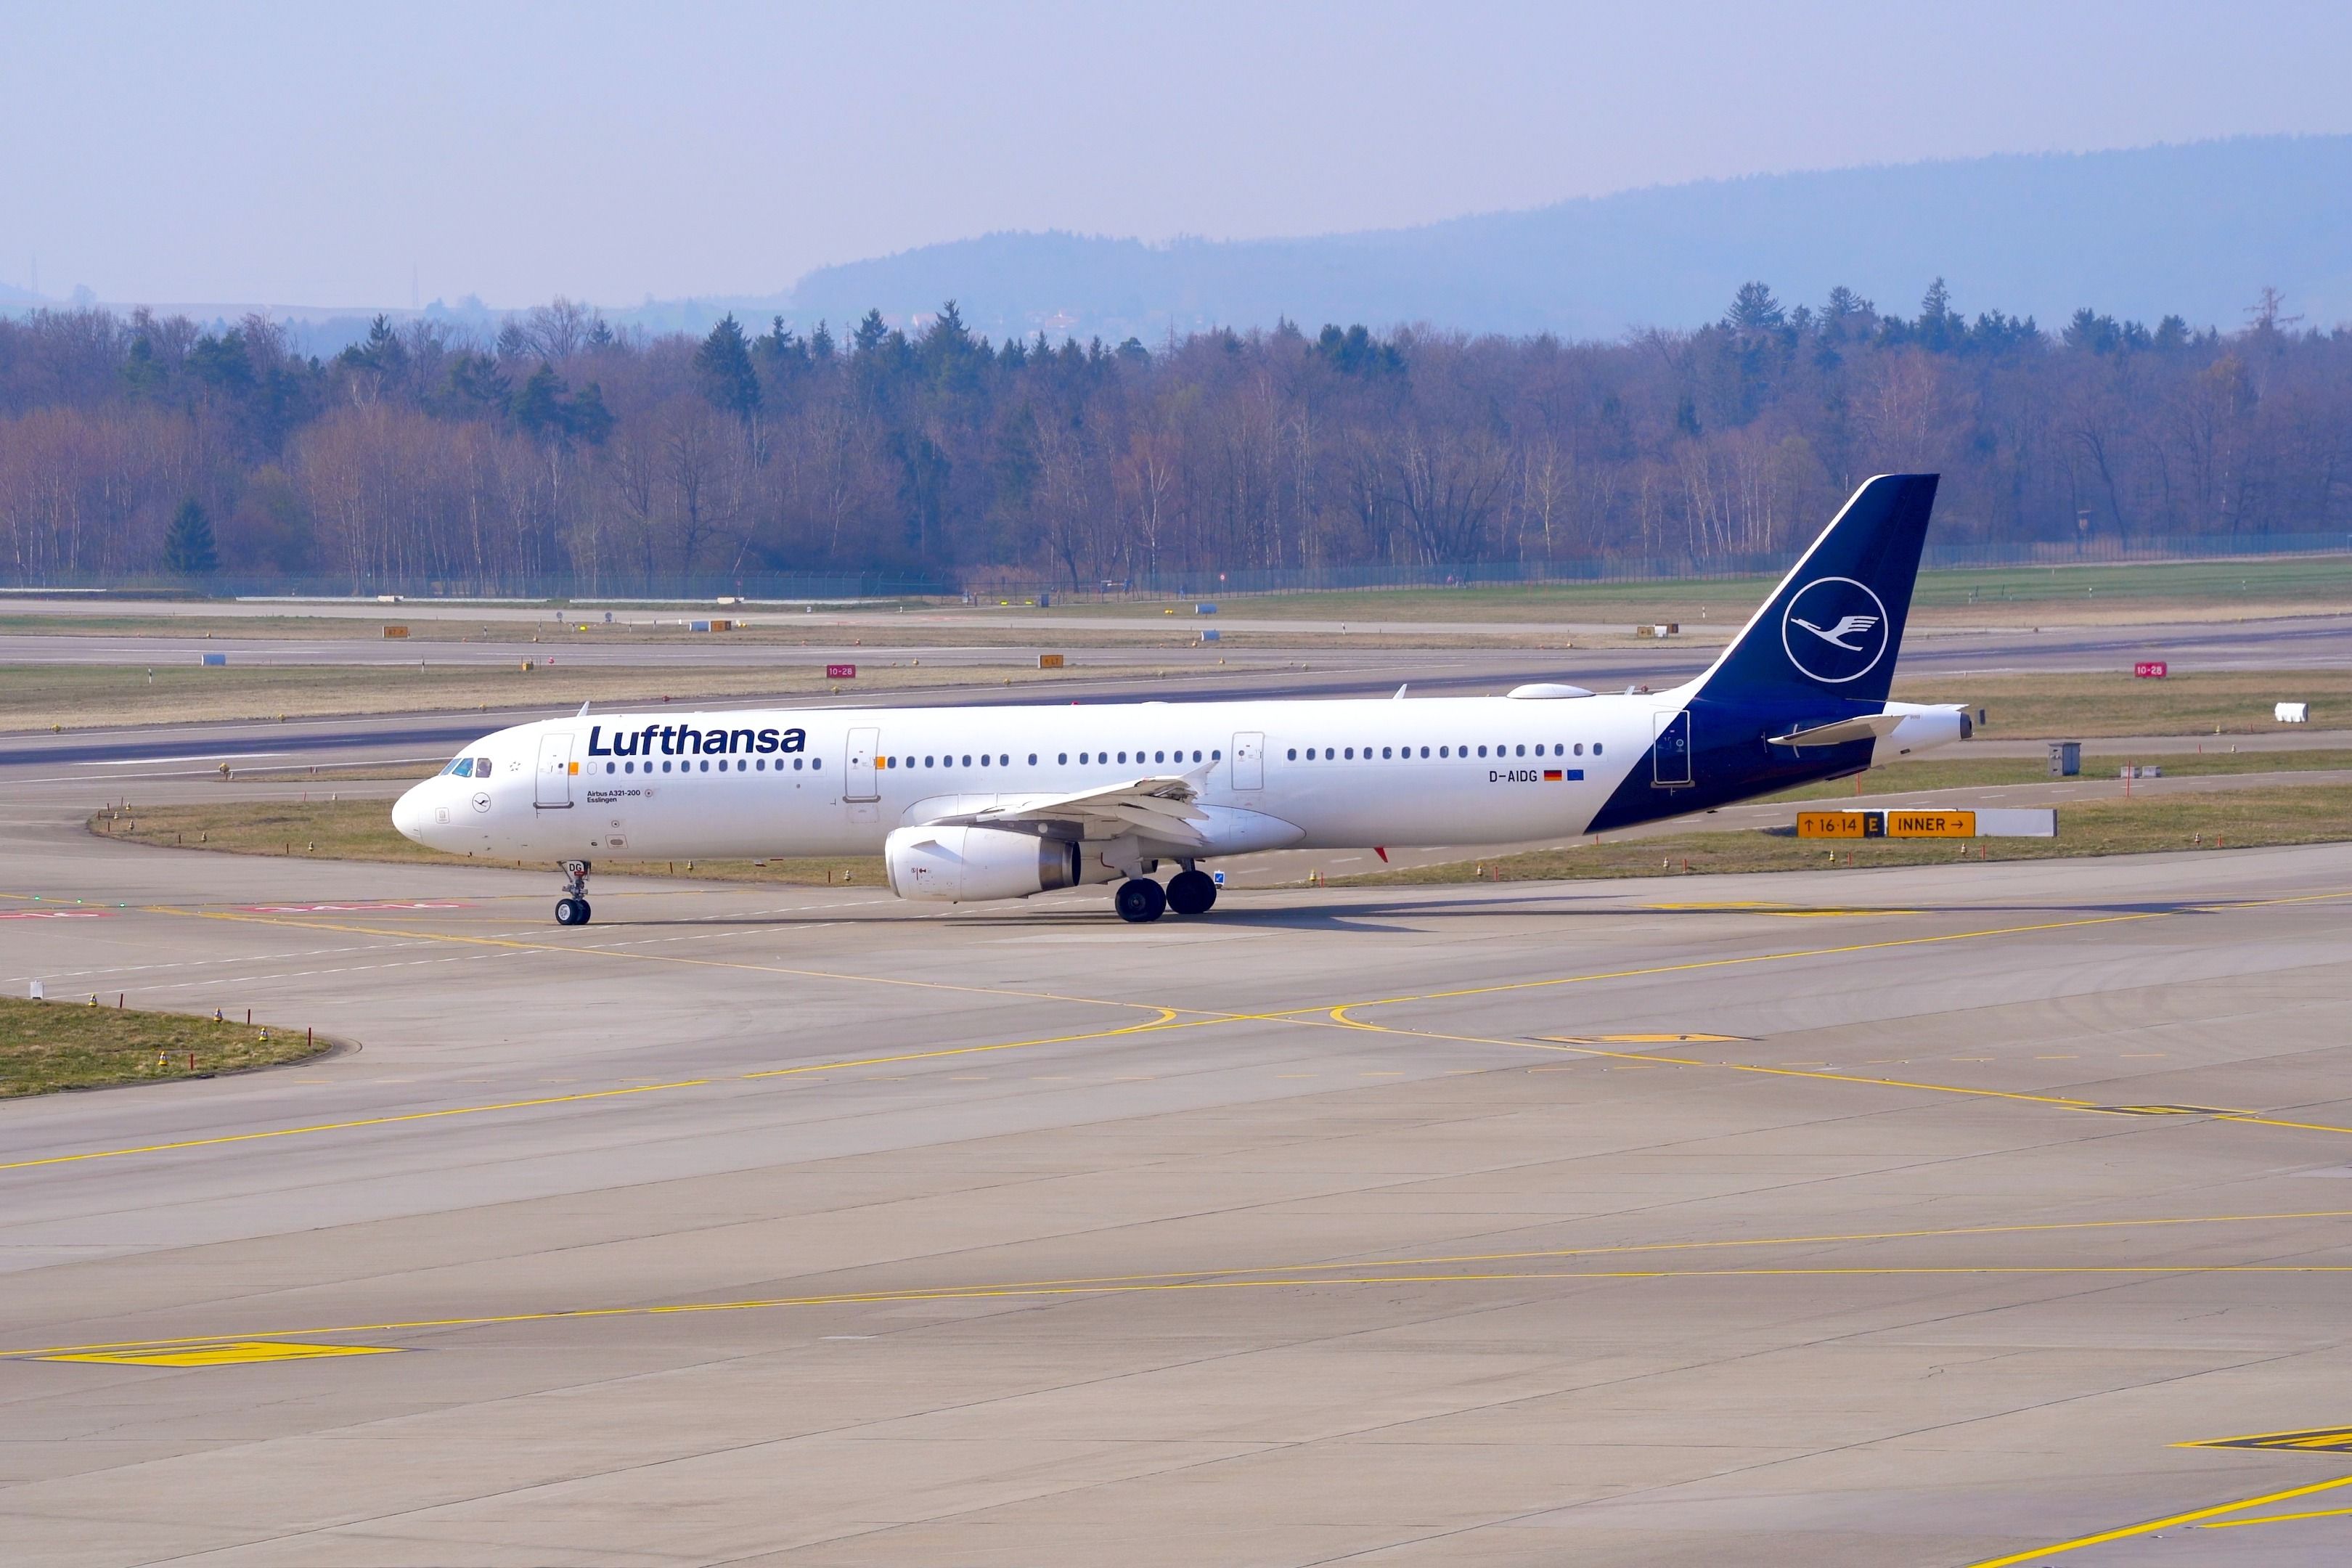 A Lufthansa Airbus A321-200 (D-AIDG) taxiing at Zürich Airport on a sunny spring day.